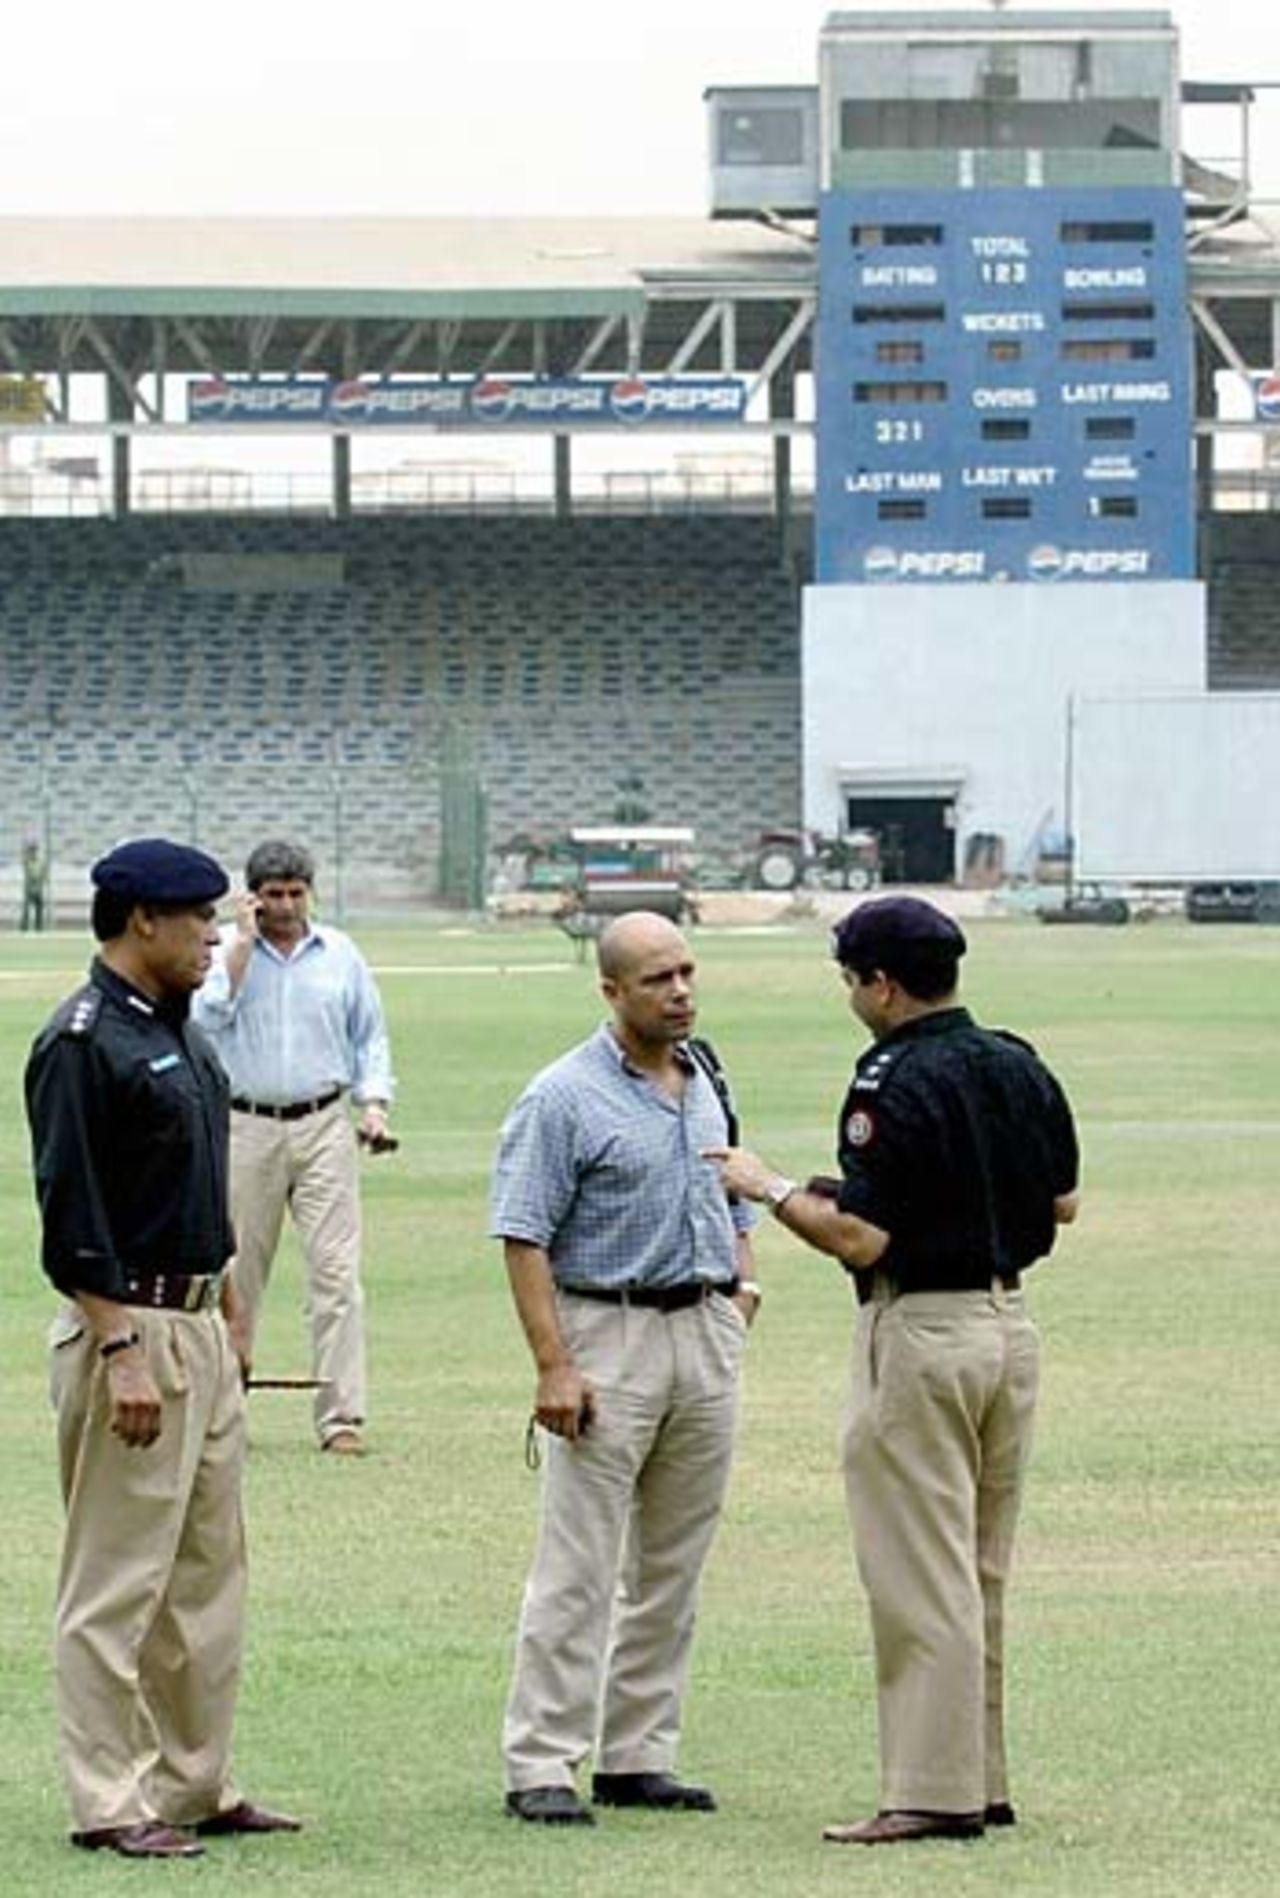 English security expert Andy Allman listens to a Pakistani police officer as he visits Karachi's National Stadium, June 28, 2005